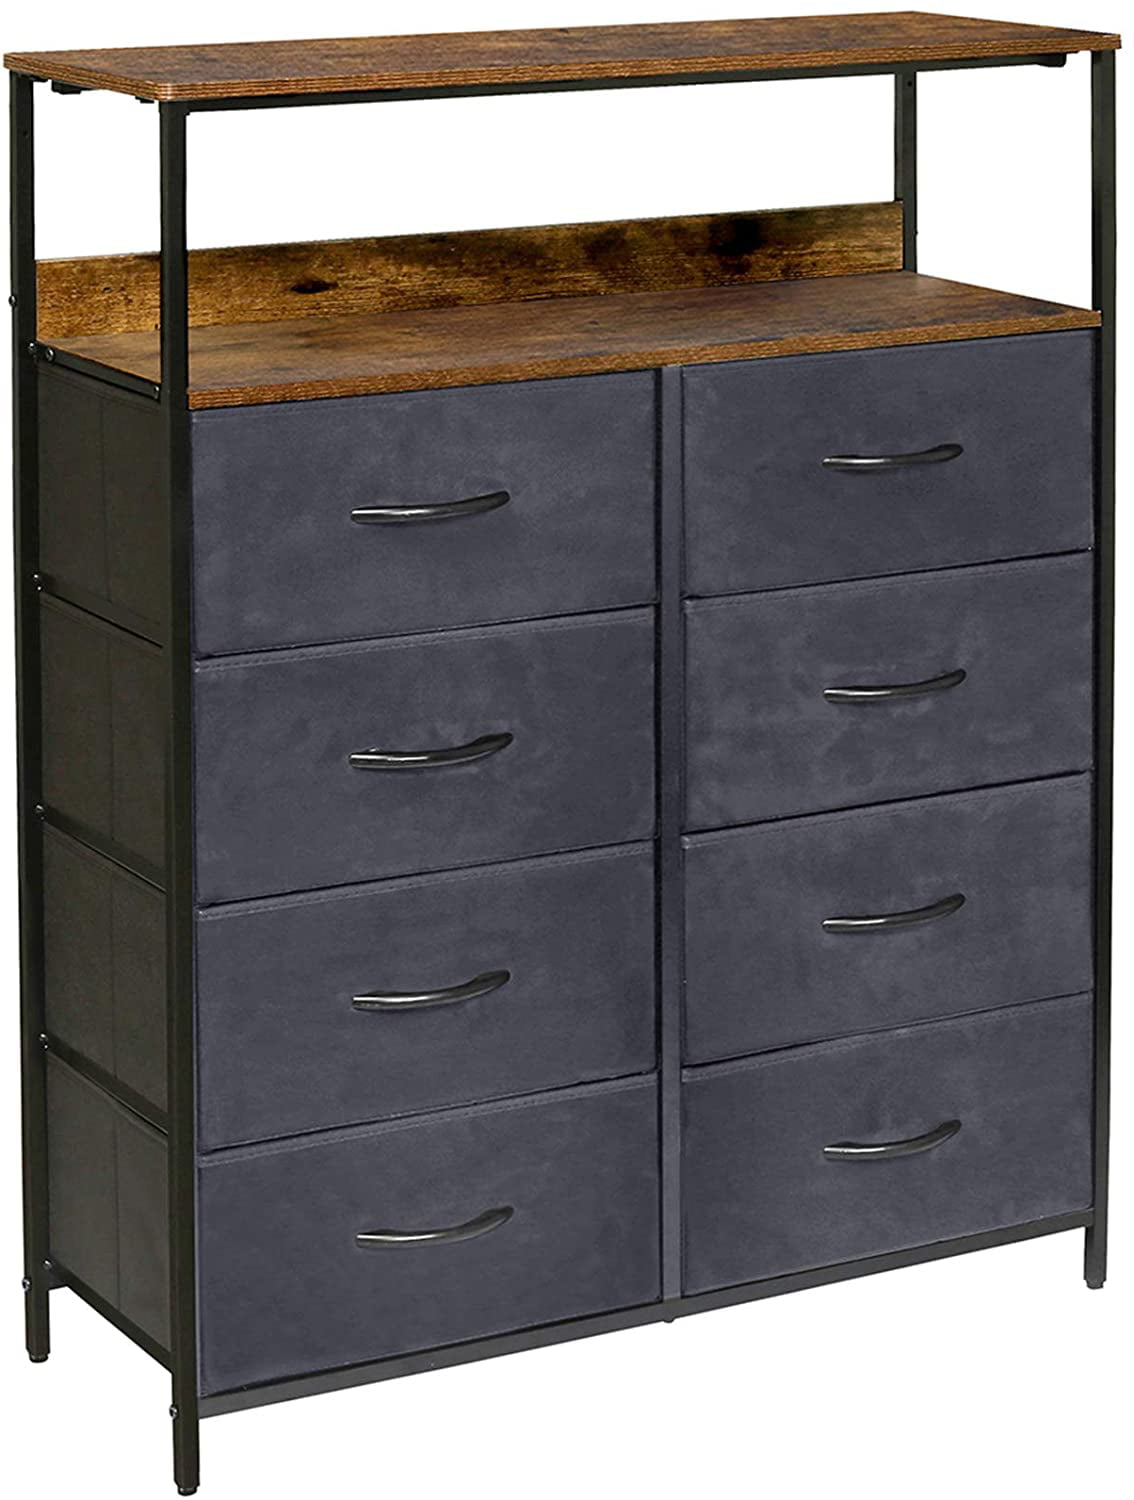 Kamiler 8 Drawers Dresser With Shelves, Tall Storage Cabinet With Drawers And Shelves